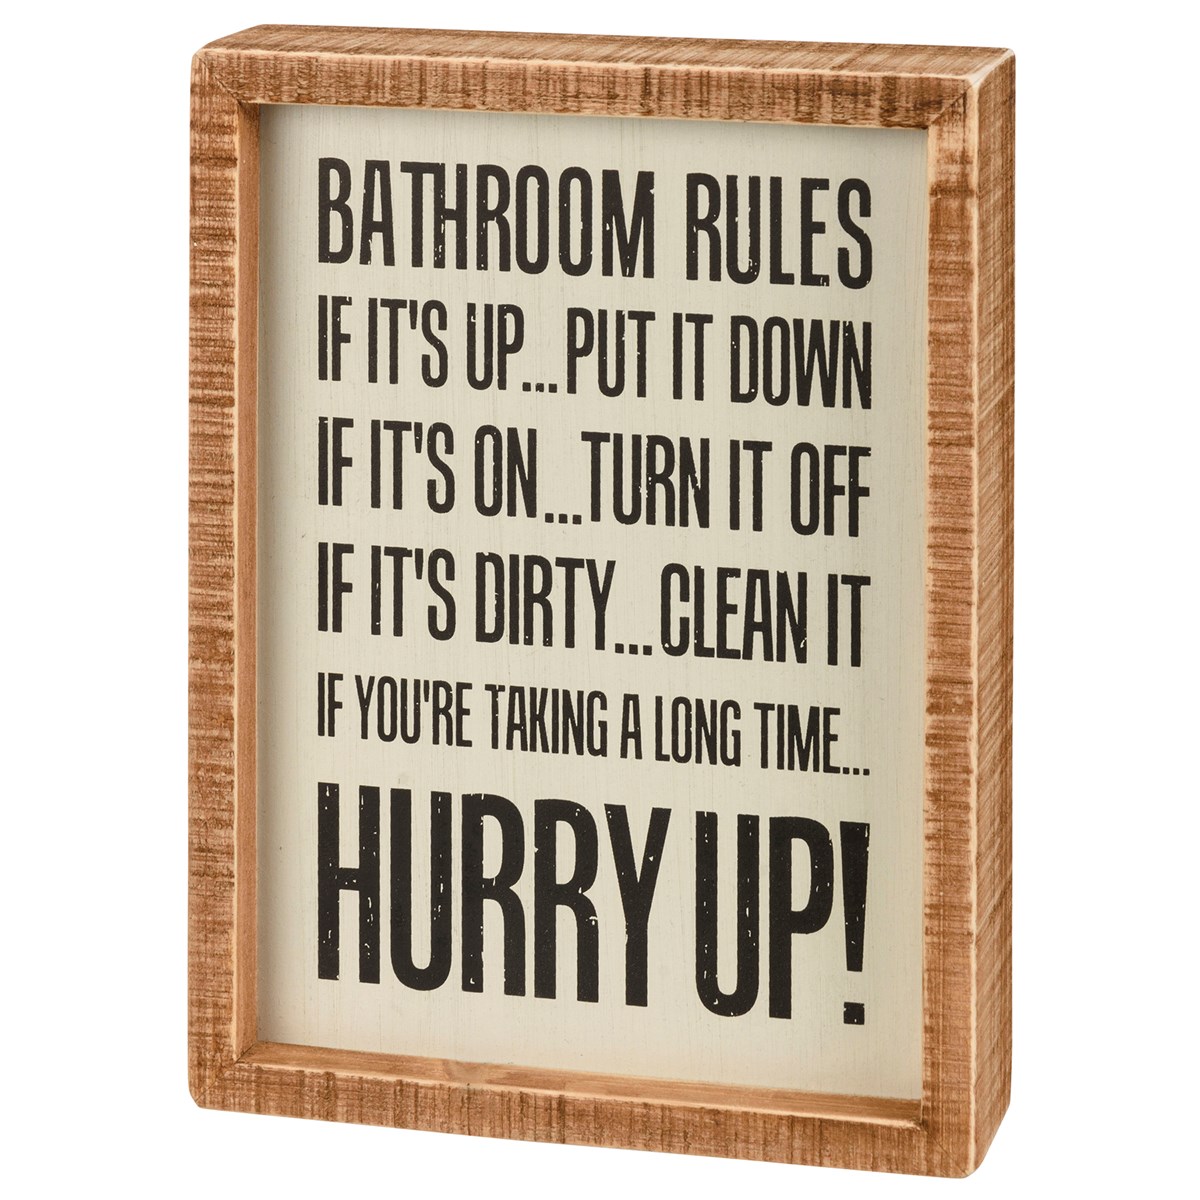 Bathroom Rules Hurry Up Inset Box Sign - Wood